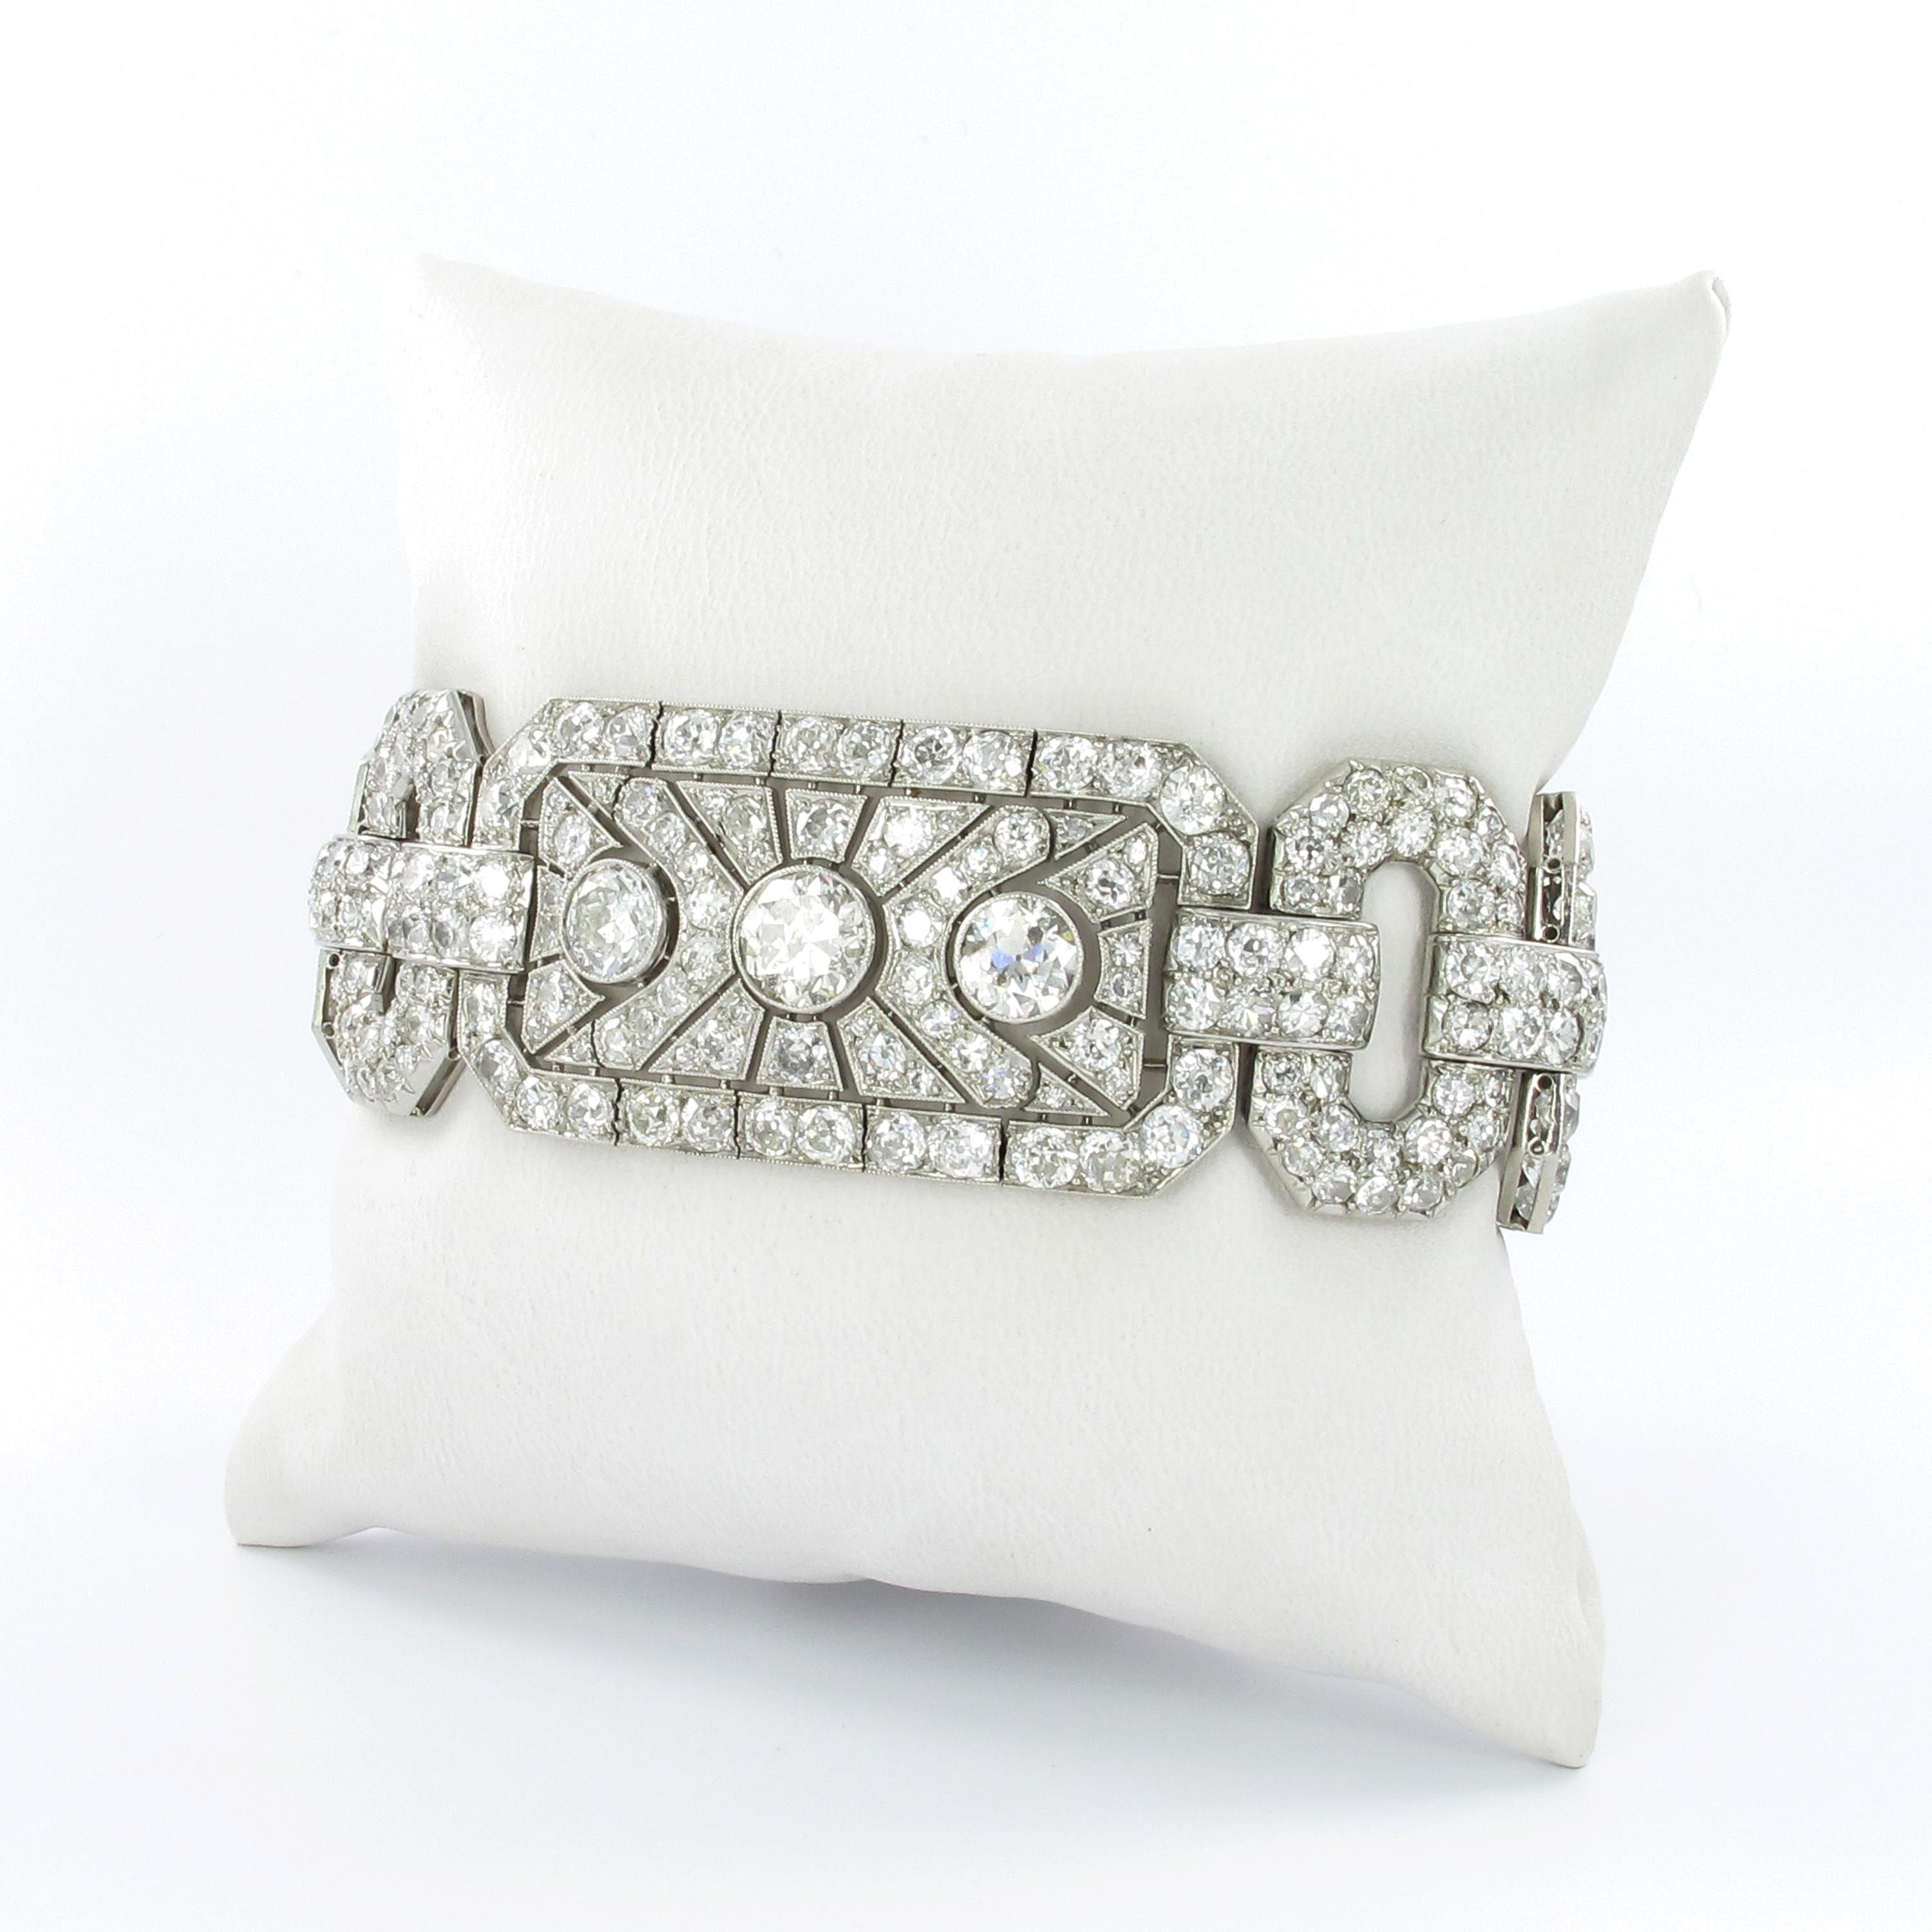 This stunning Art Deco bracelet in platinum 950 is set with a total of 361 Old European cut diamonds. The three main elements feature 9 diamonds of G/H color and si2/si3 clarity, total weight approximately 8.10 carats. Surrounded by 352 diamonds of